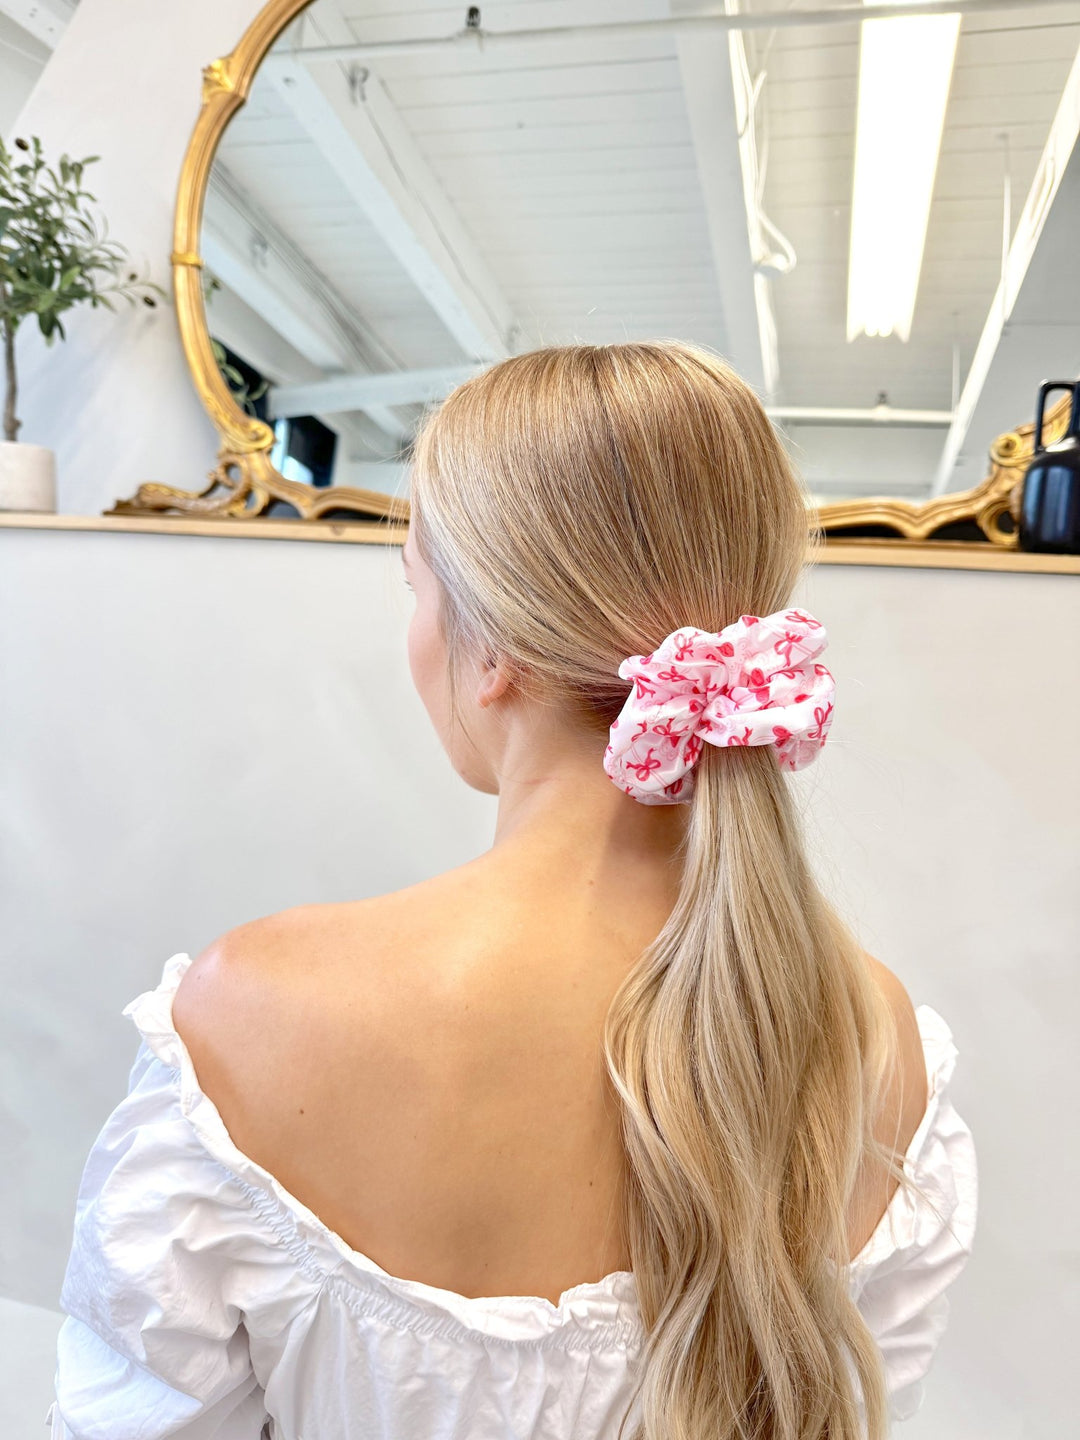 FOR THE LOVE OF BOWS - Mulberry Silk Scrunchie - Beyond Scrunchies